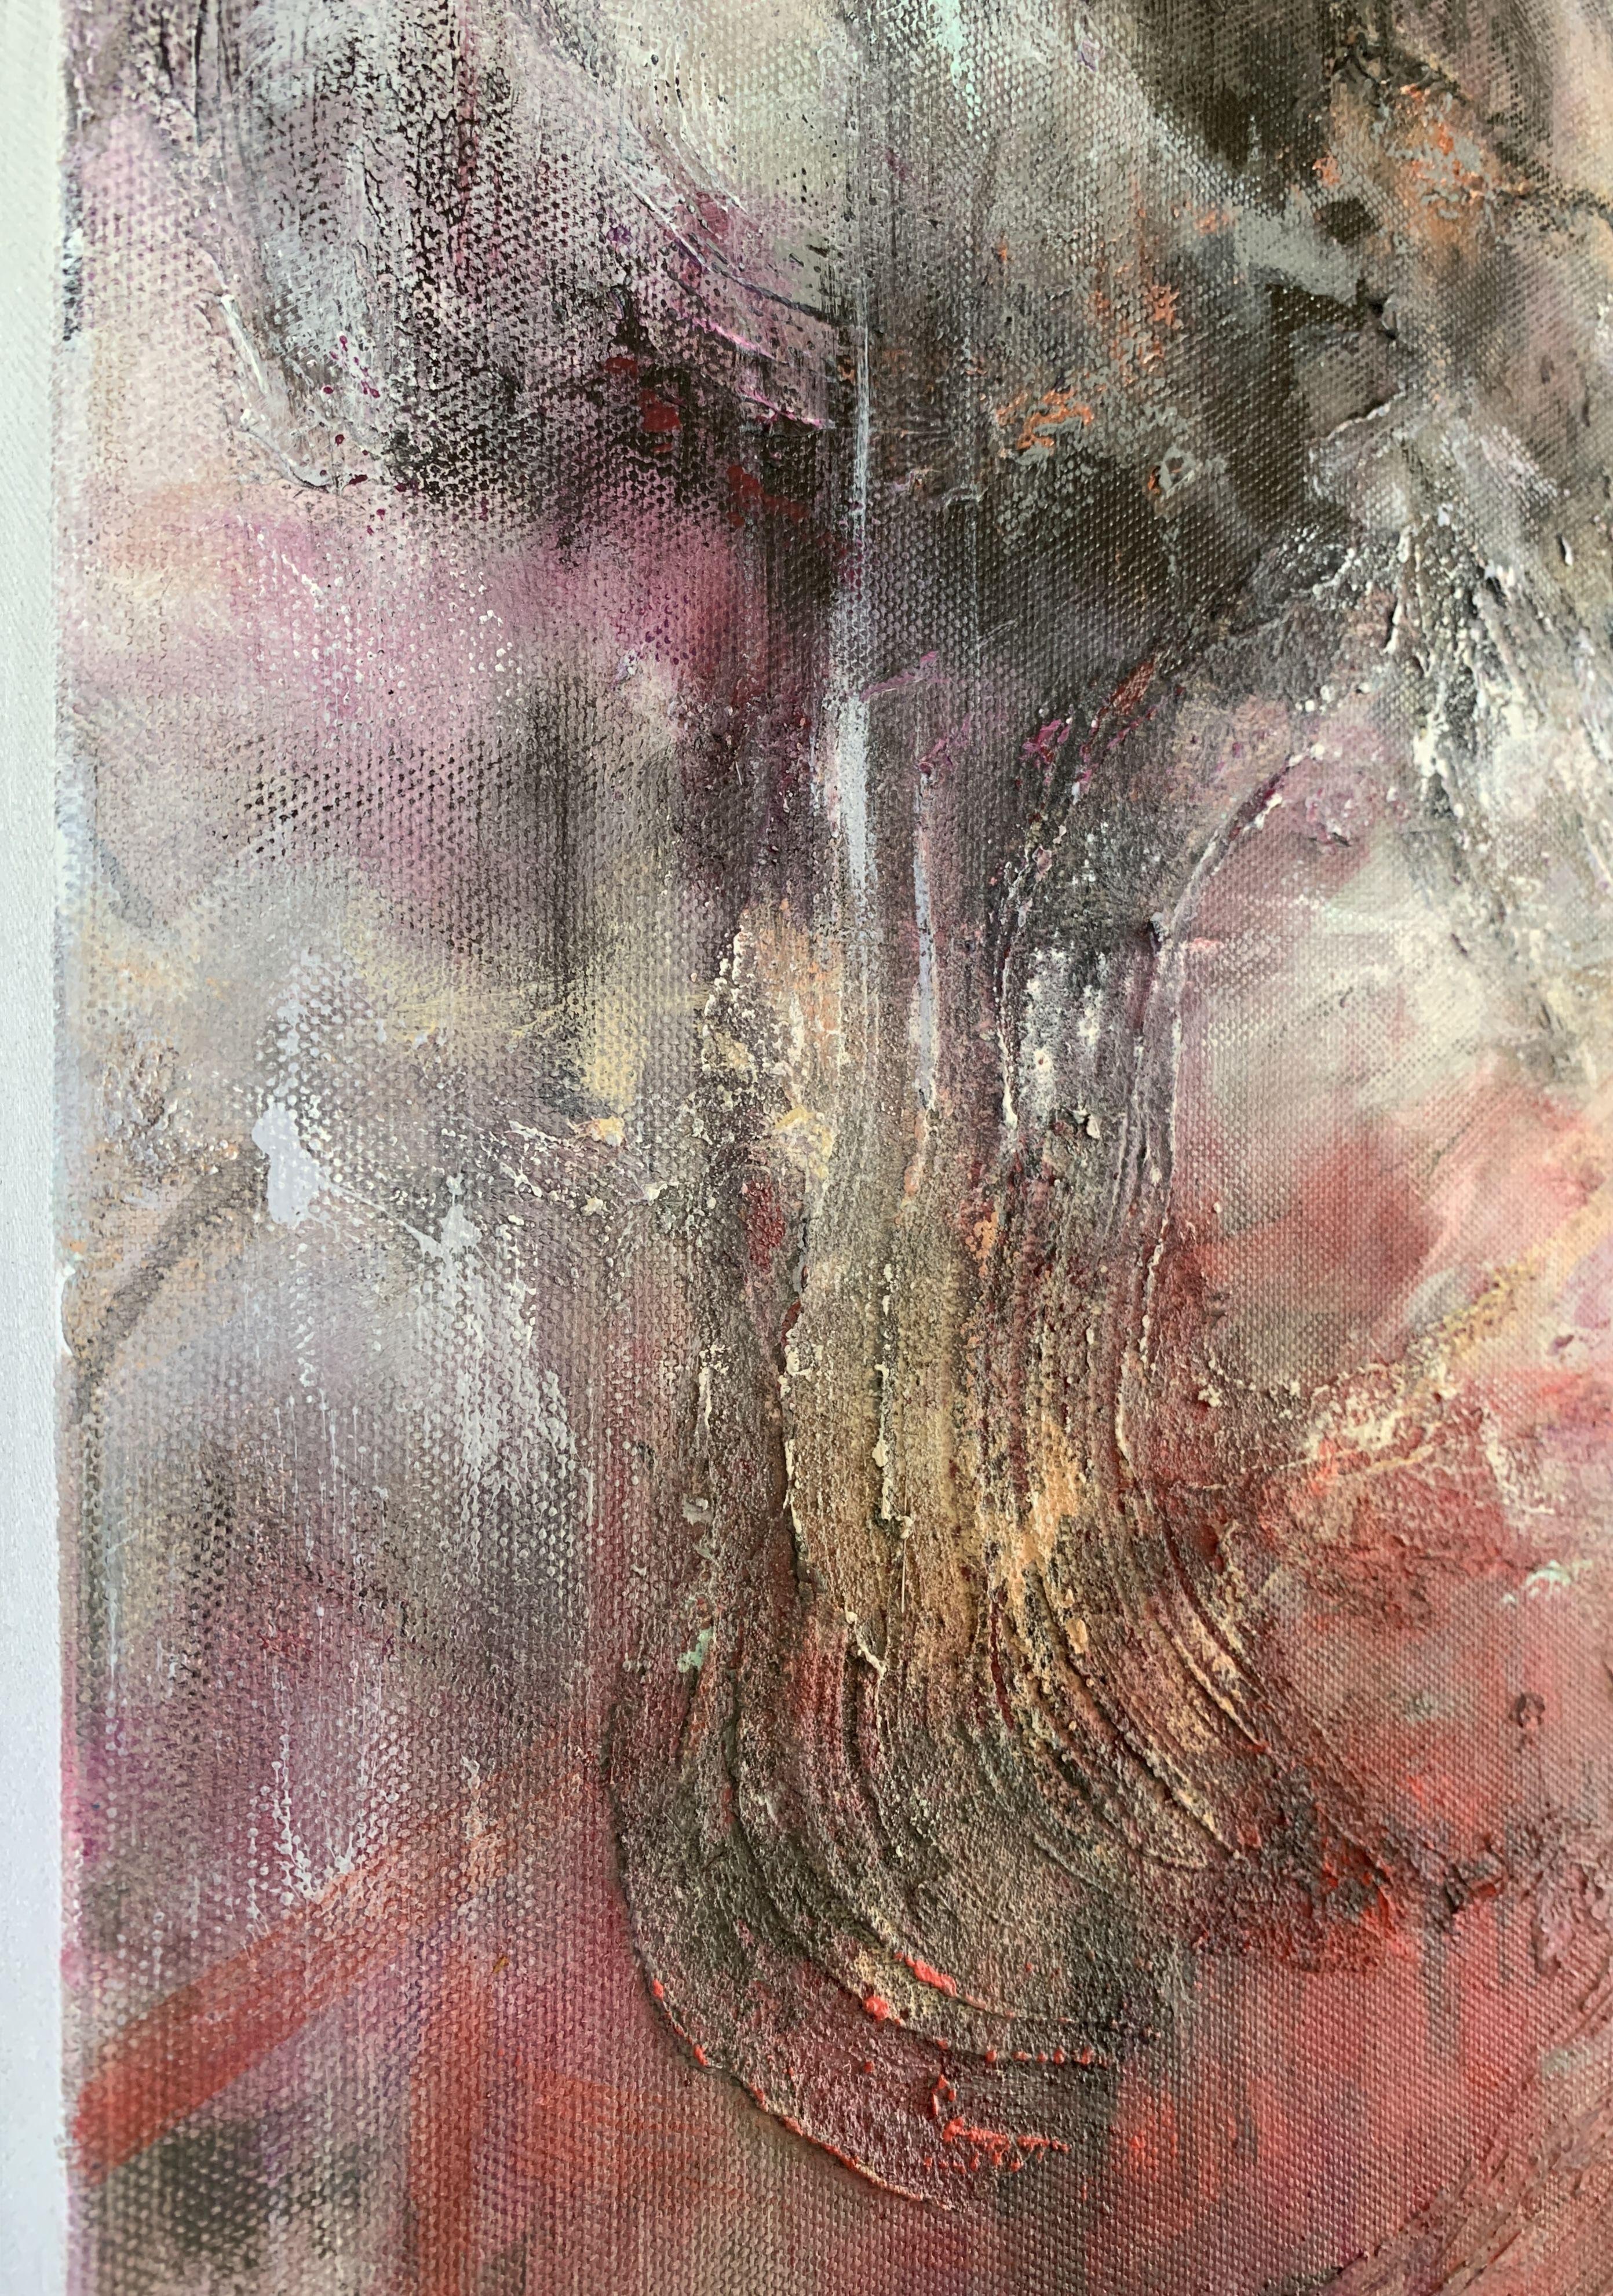 Bare, exposed, showing what lies underneath. A composition of acrylic paint, plaster, sand and pastels, inspired by the hidden layers. Exploring an intense, yet playful way how colours create light and shadows while drawing you into hidden depths. 